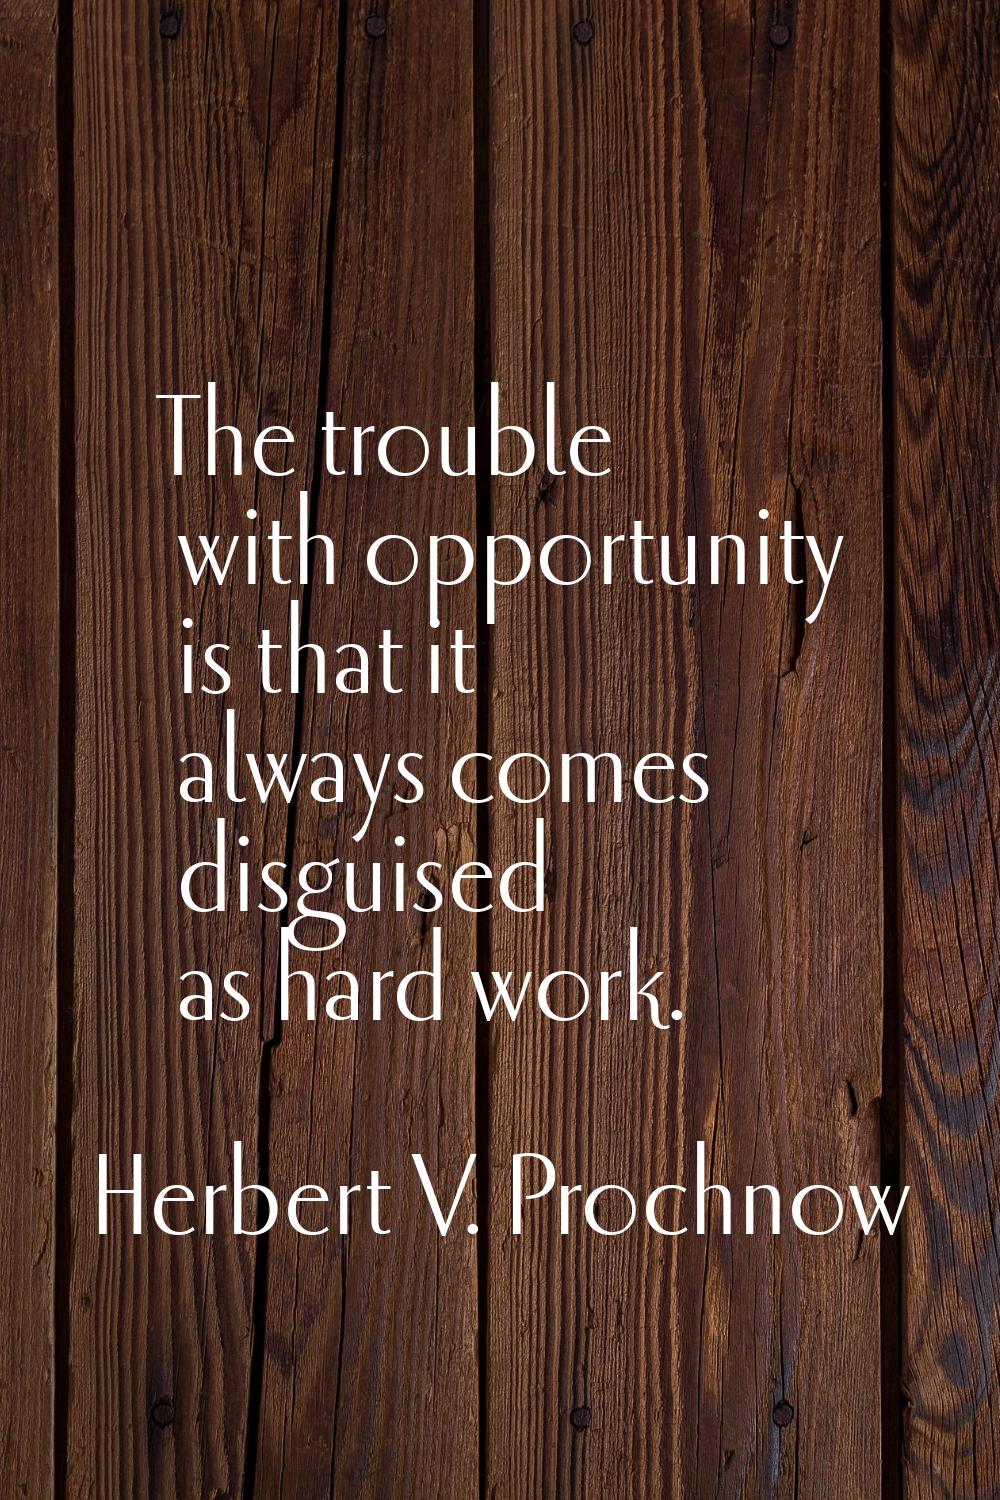 The trouble with opportunity is that it always comes disguised as hard work.